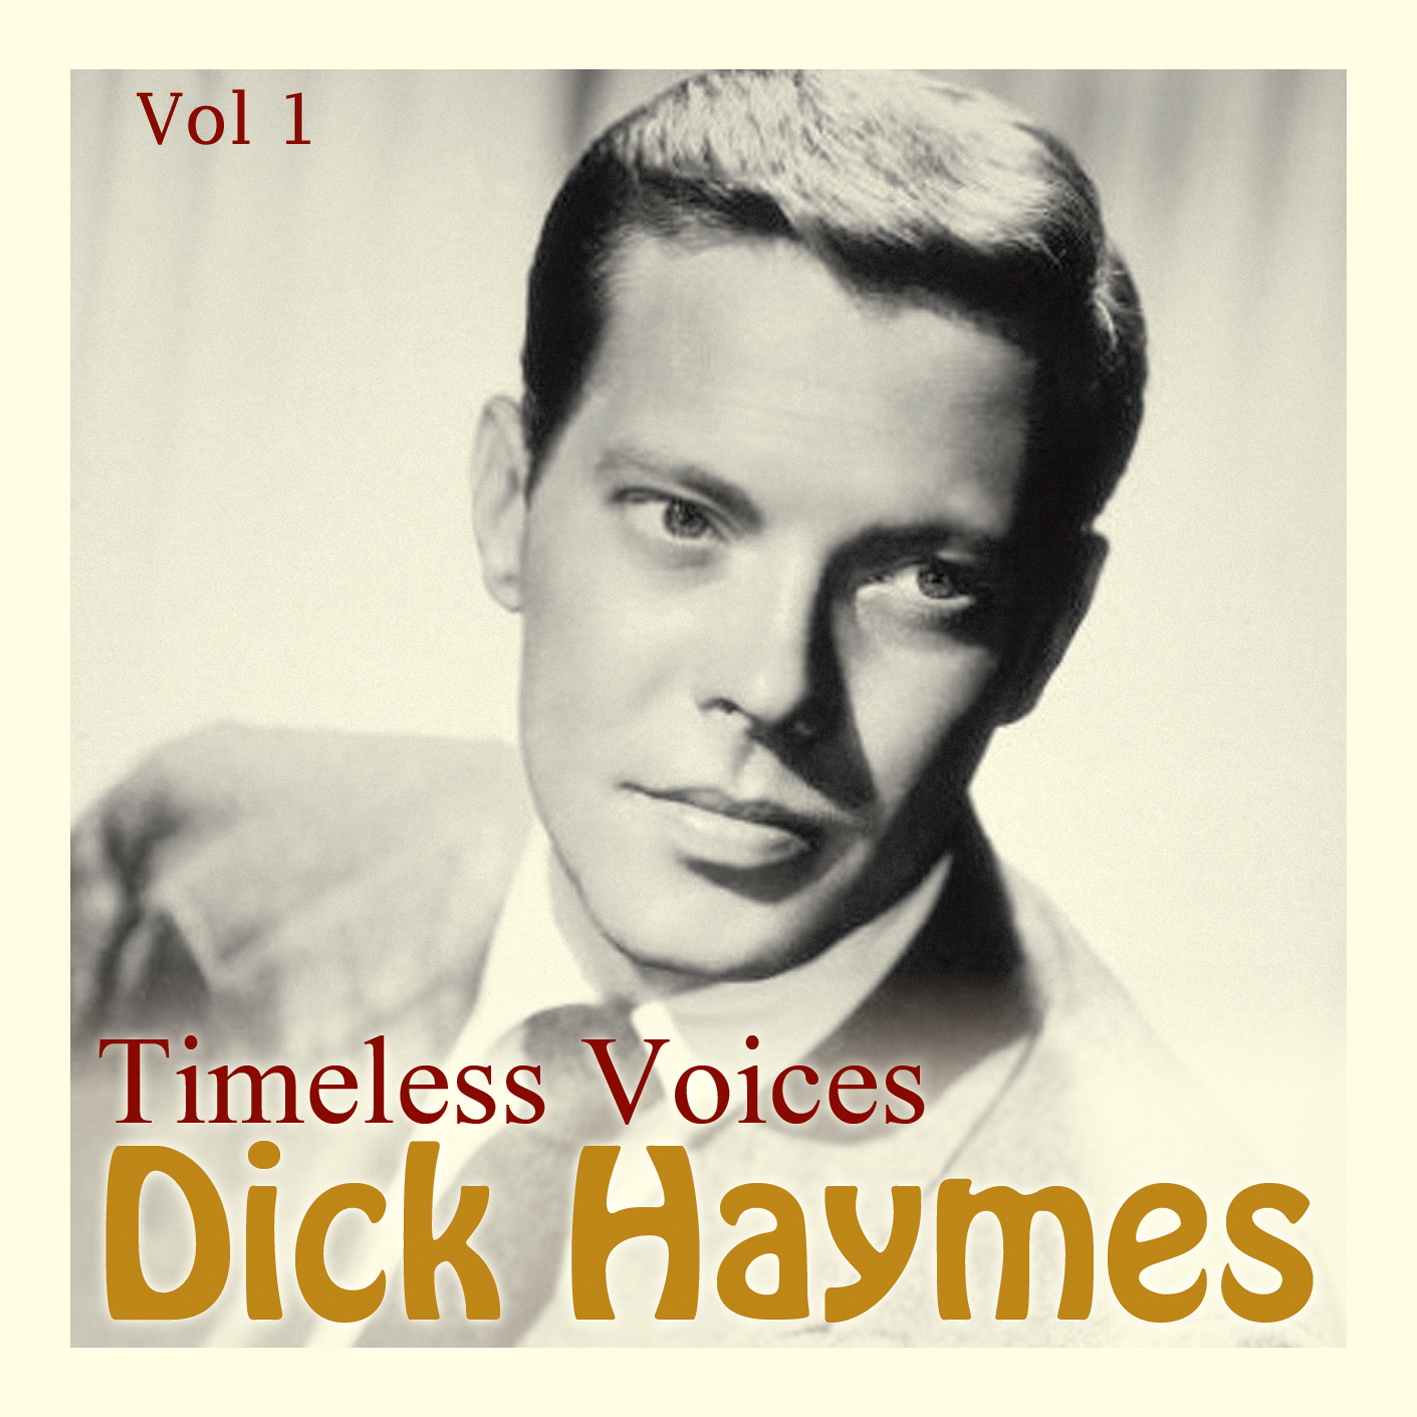 Timeless Voices: Dick Haymes Vol 1